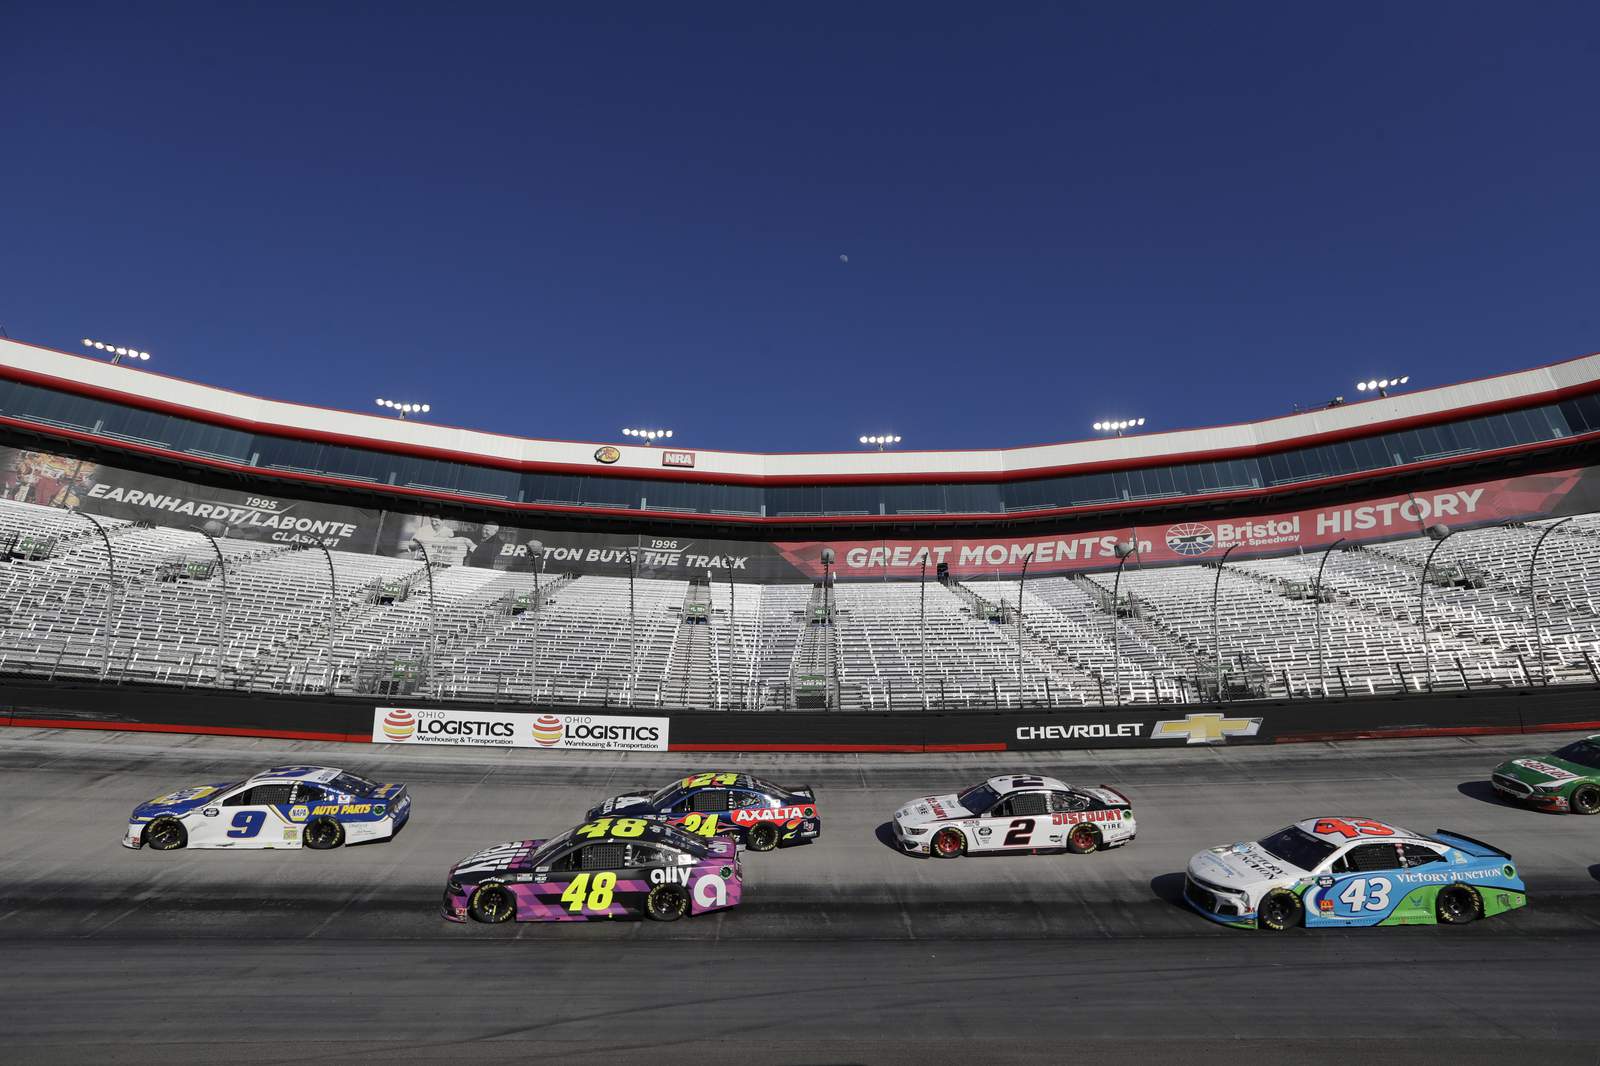 NASCAR wants 30,000 fans at All-Star race in Tennessee